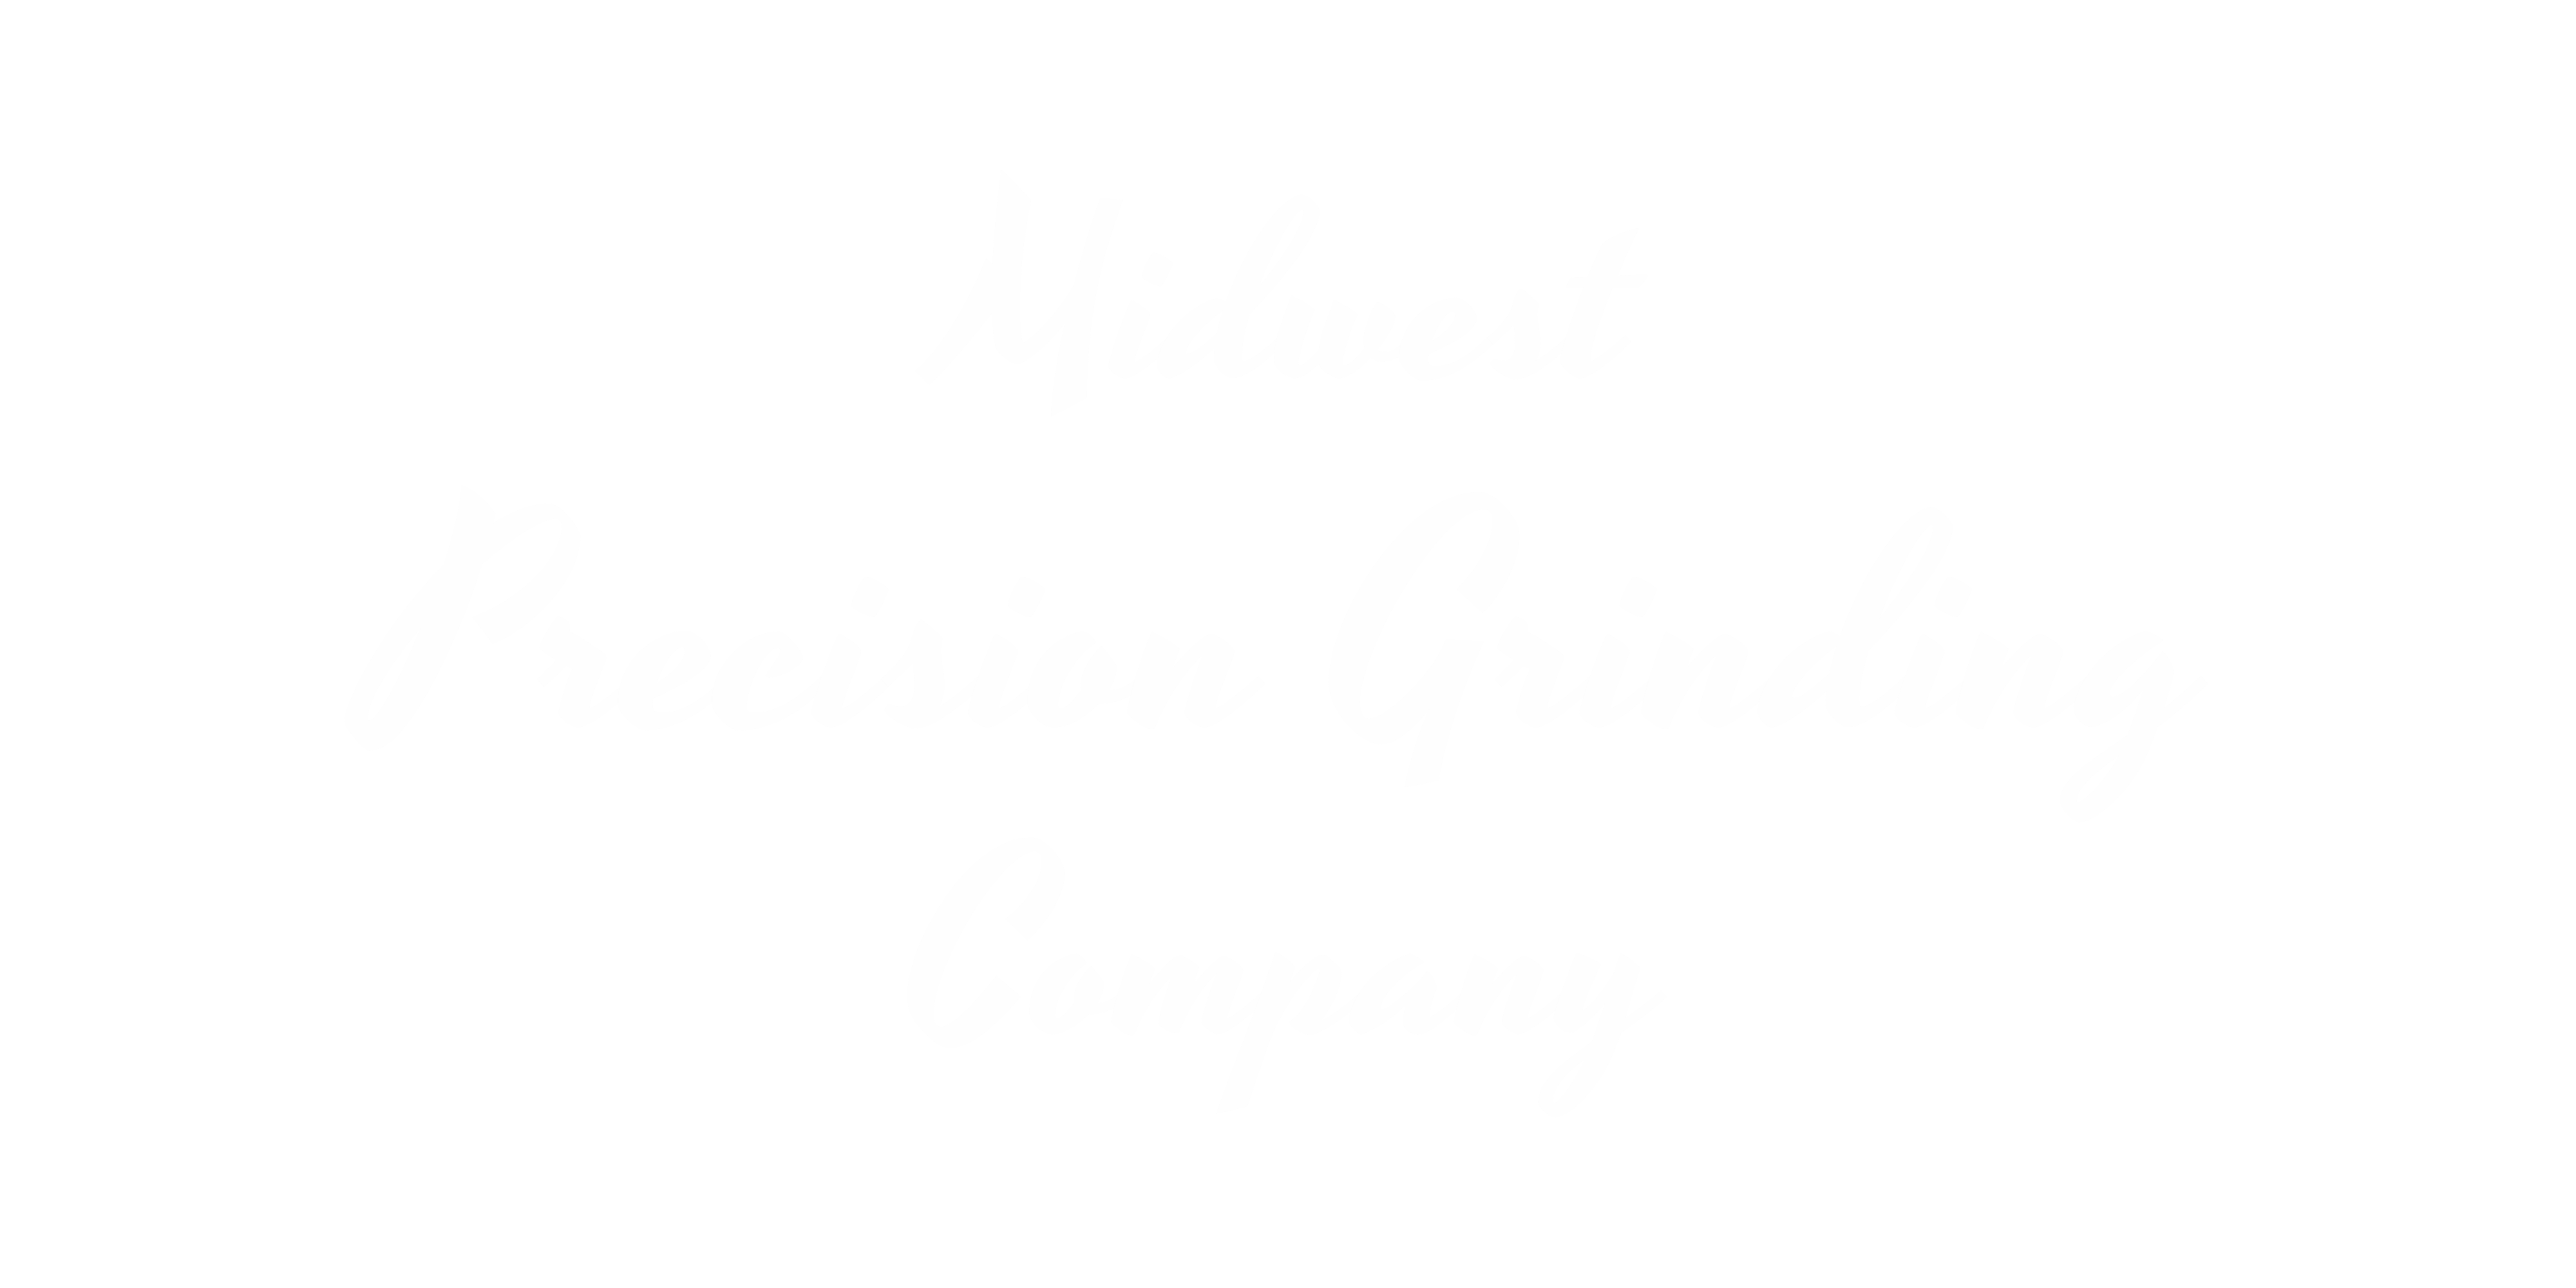 Midwest Precision Grinding Co.